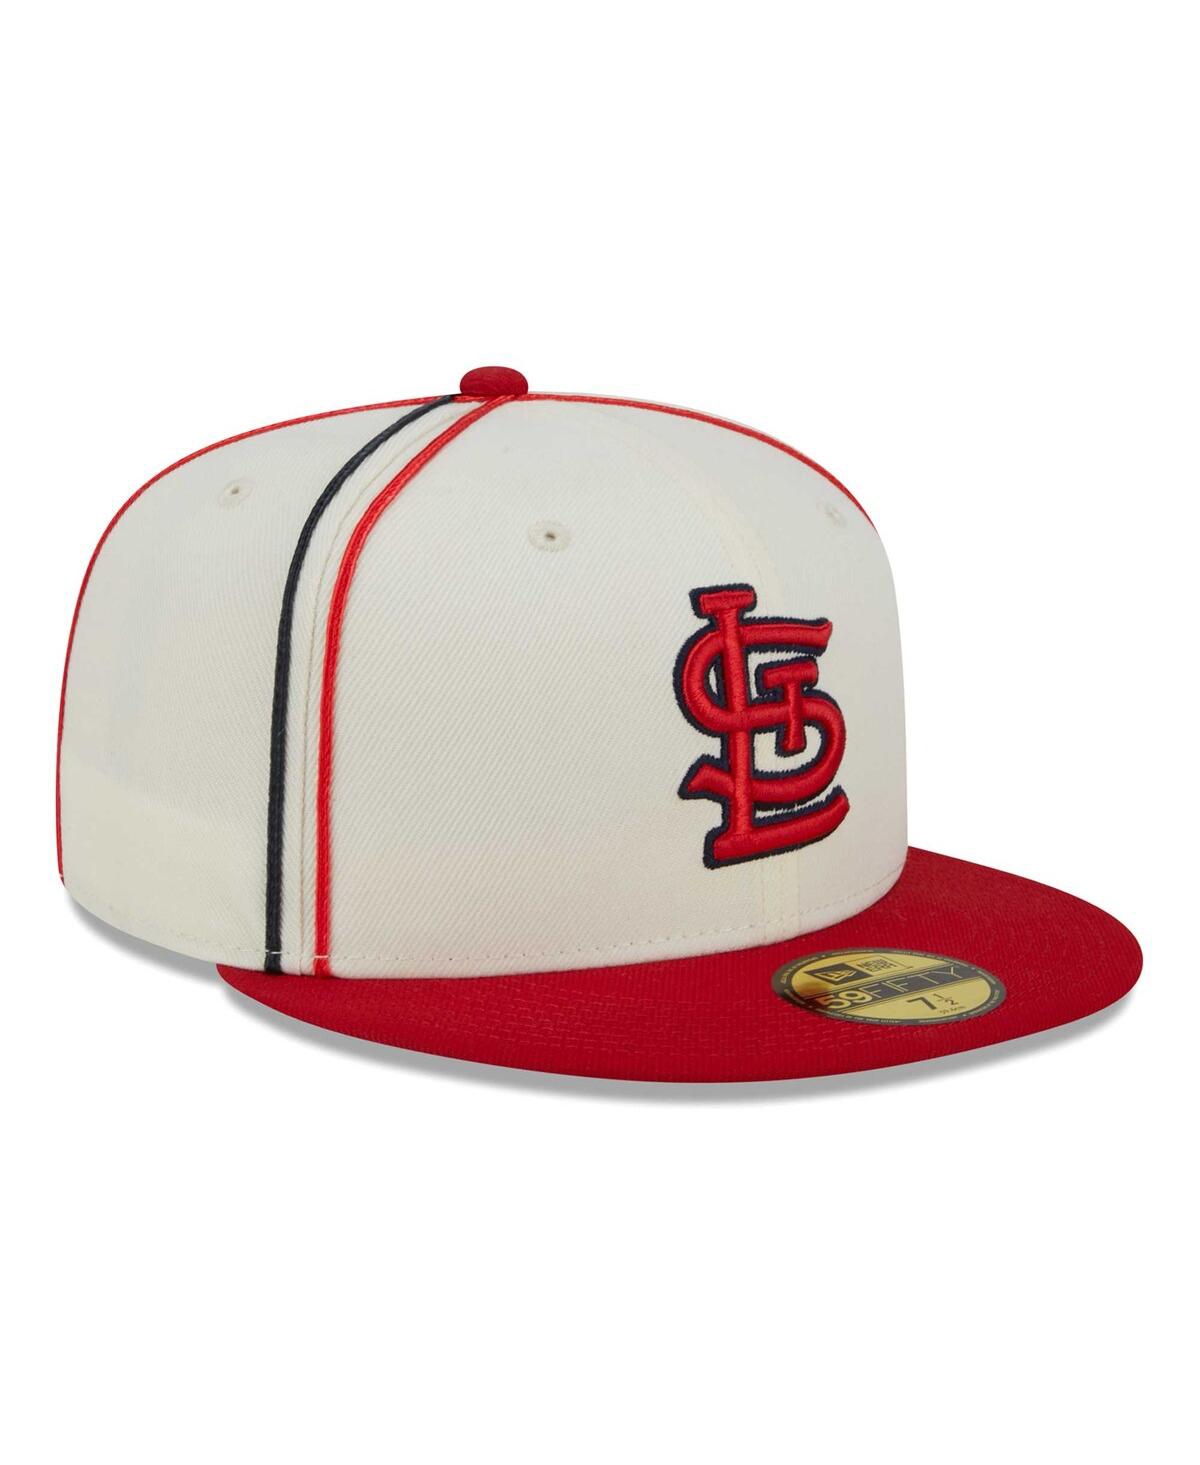 New Era Men's Cream, Red St. Louis Cardinals Chrome Sutash 59FIFTY Fitted Hat - Cream, Red